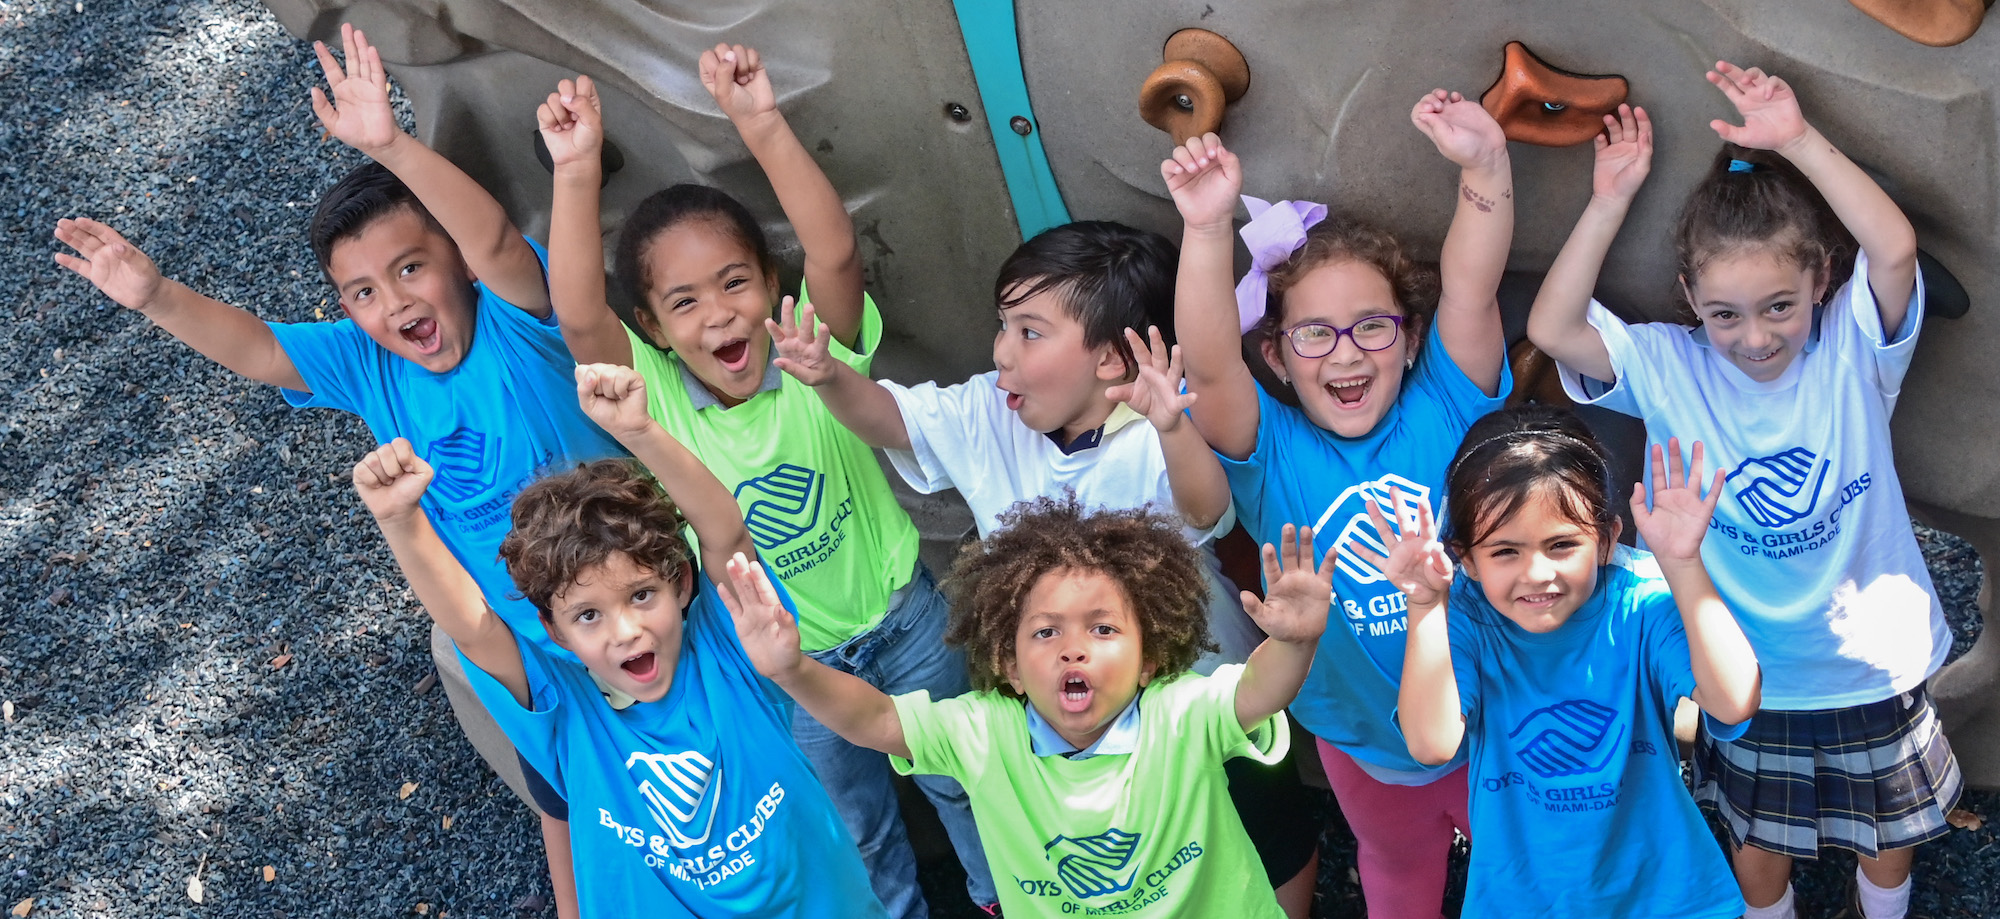 Children in boys and girls club t shirts with their hands up